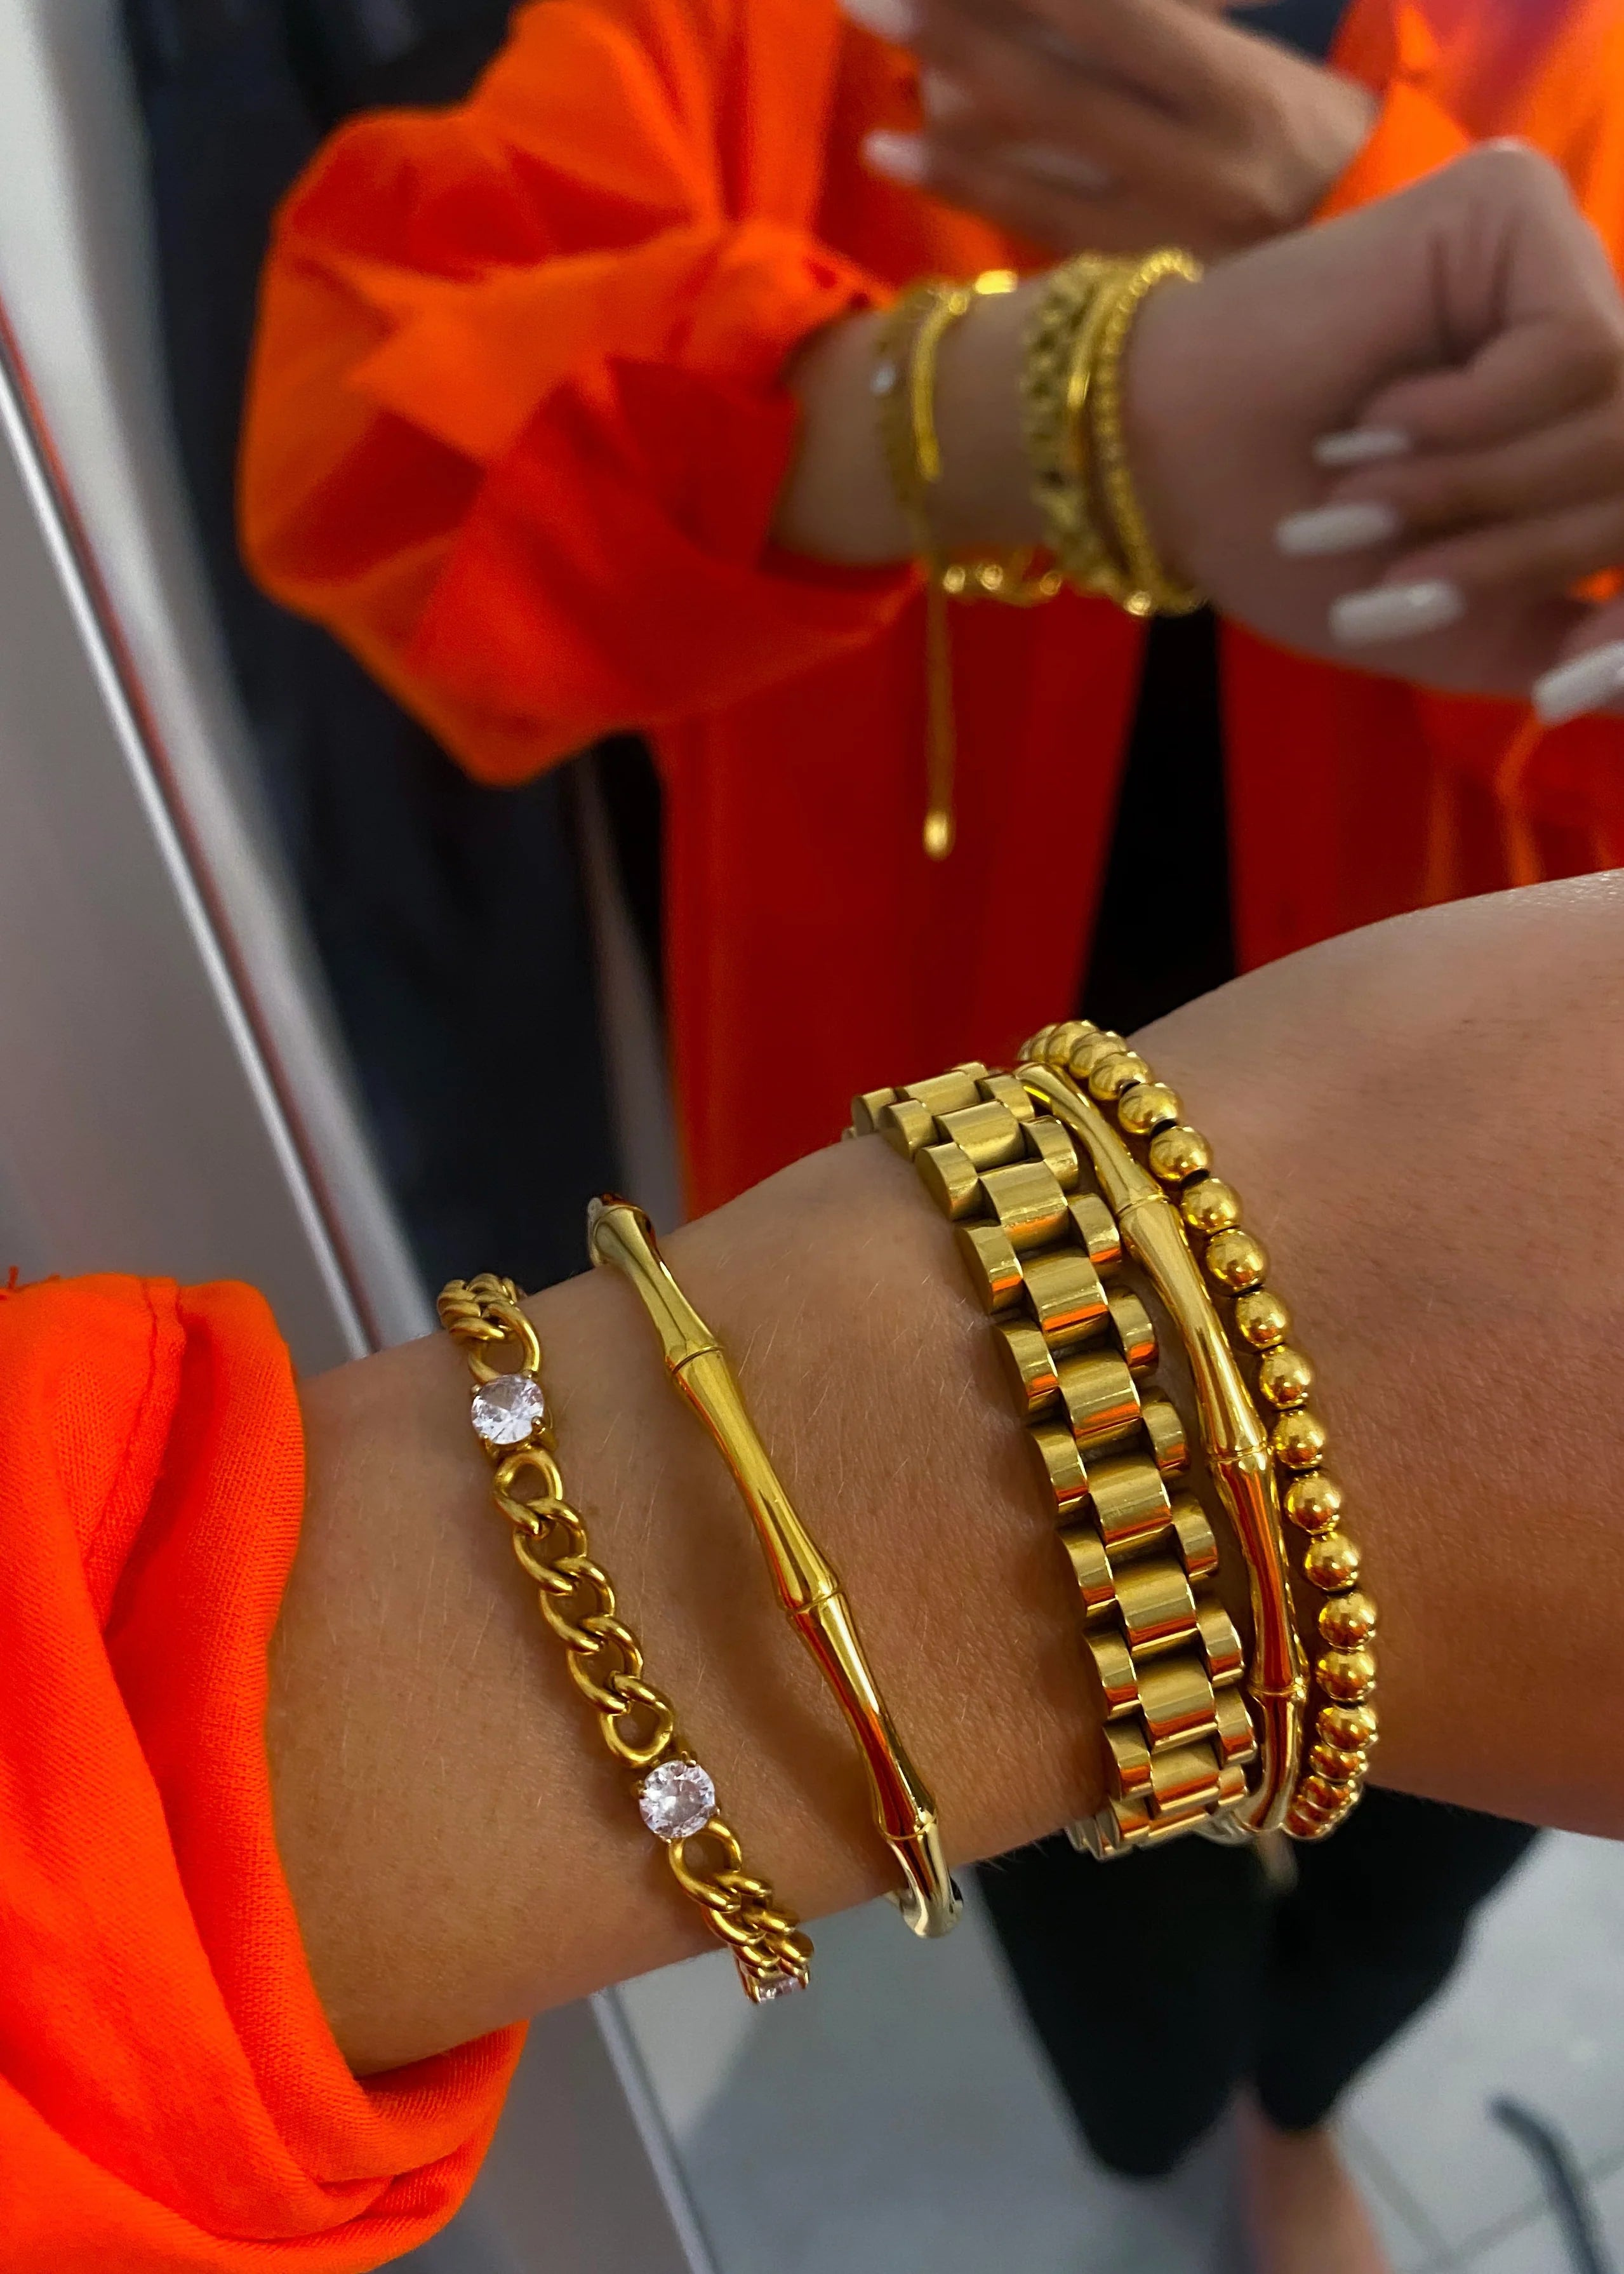 The Thin Gold Watch Band Bracelet